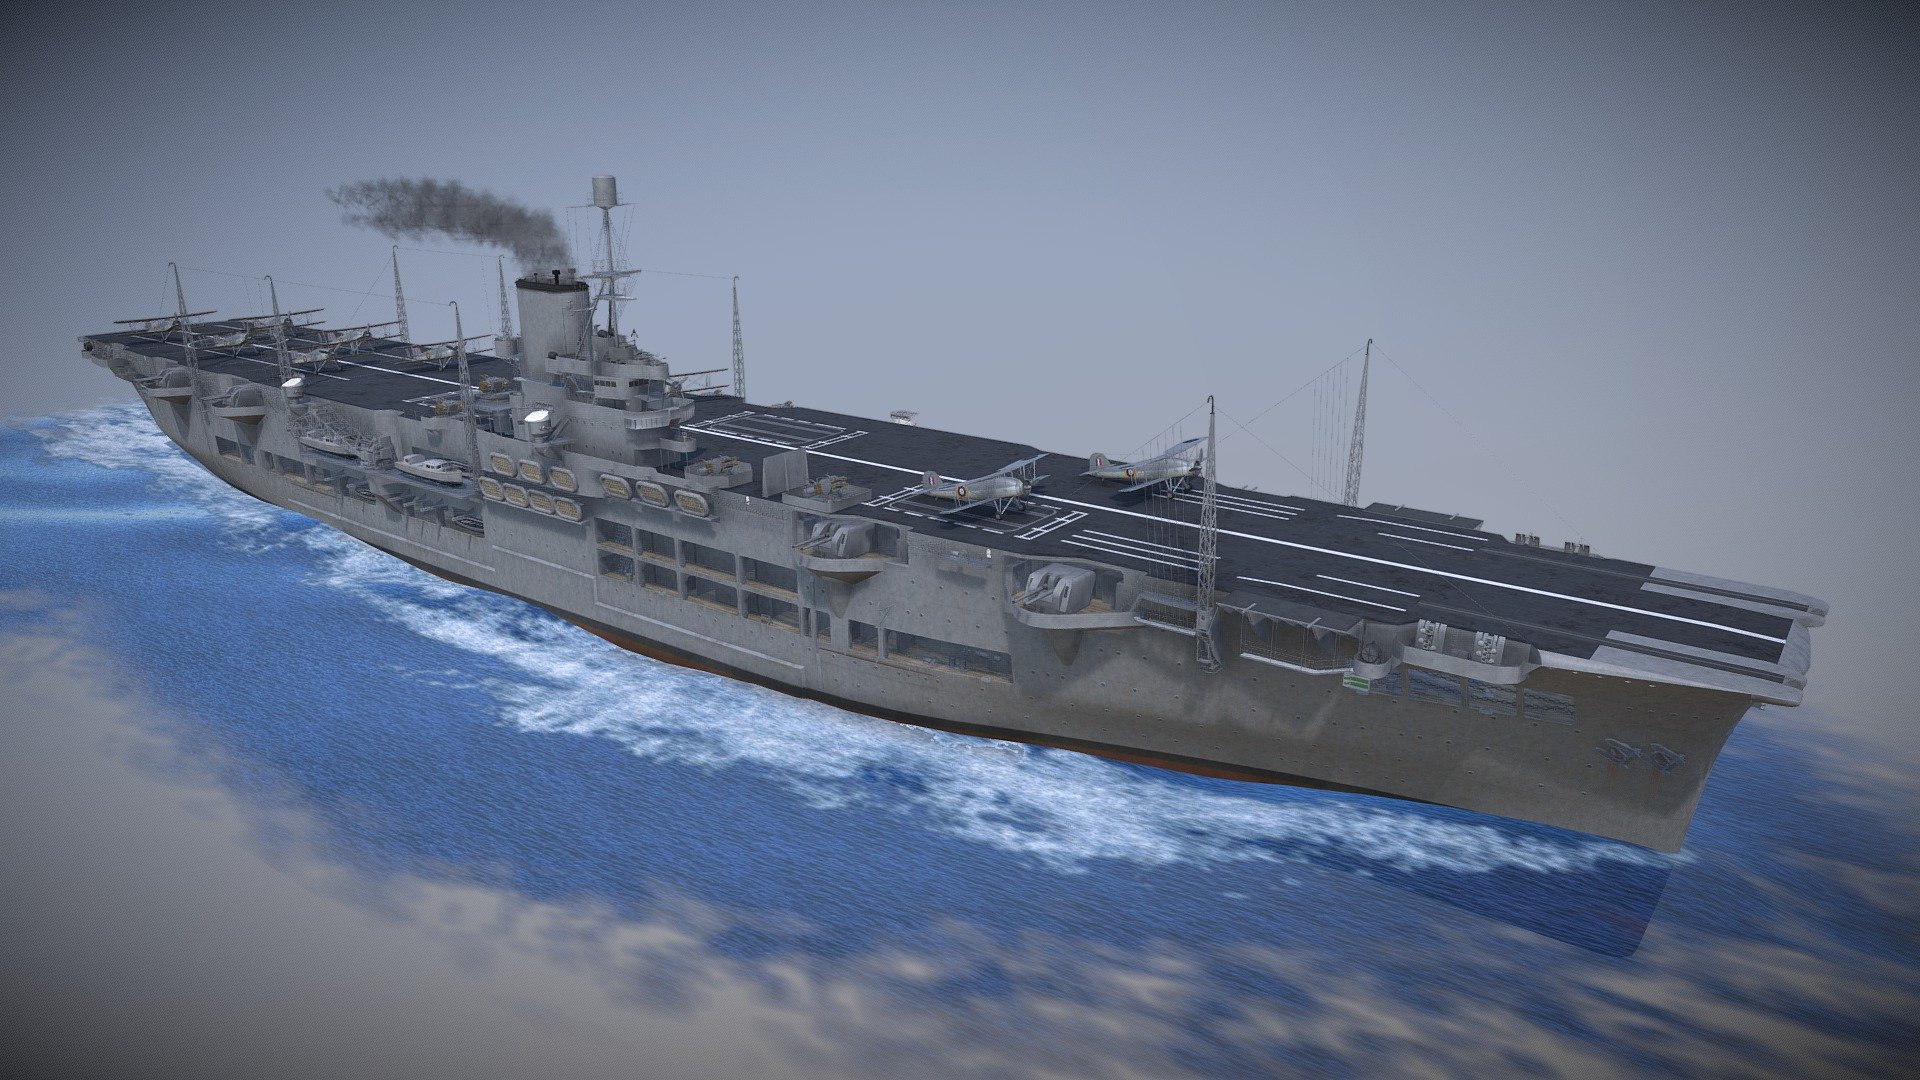 The HMS Ark Royal (with pennant number 91) was an aircraft carrier in World War 2 serving for the Royal Navy. This model is with her Fairey Swordfish torpedo bombers.
(switch to HD textures in the settings for the best results)

(reuploaded on 11/20/2021 with remodelled hull and boats) - Ark Royal - Buy Royalty Free 3D model by ThomasBeerens 3d model